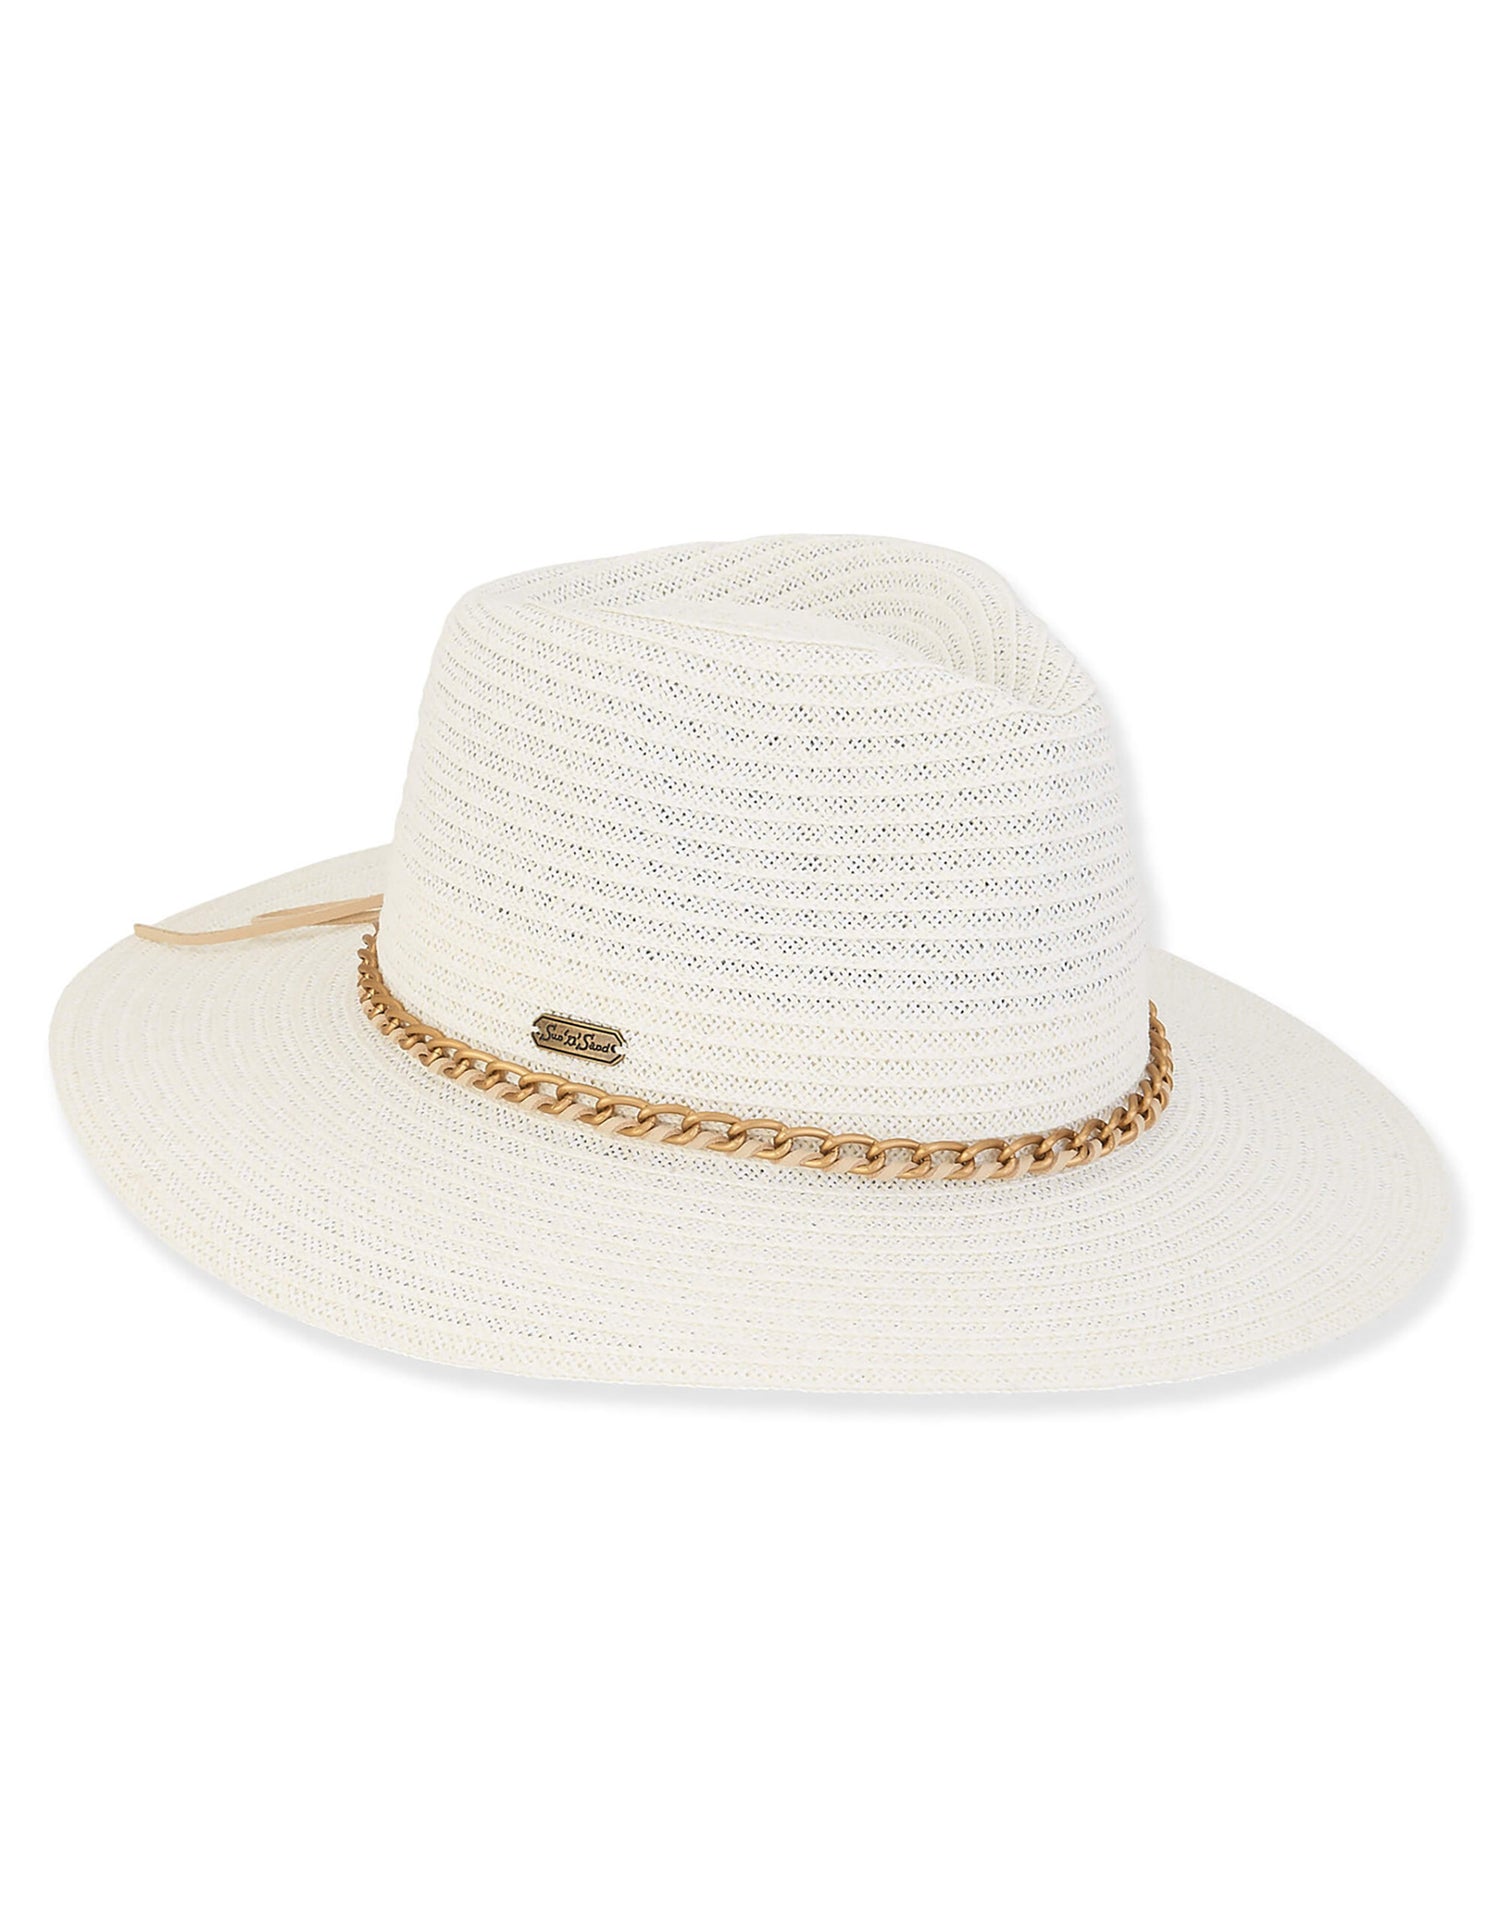 Lainey Paper Braid Safari Hat by Sun N Sand in White - Angled View